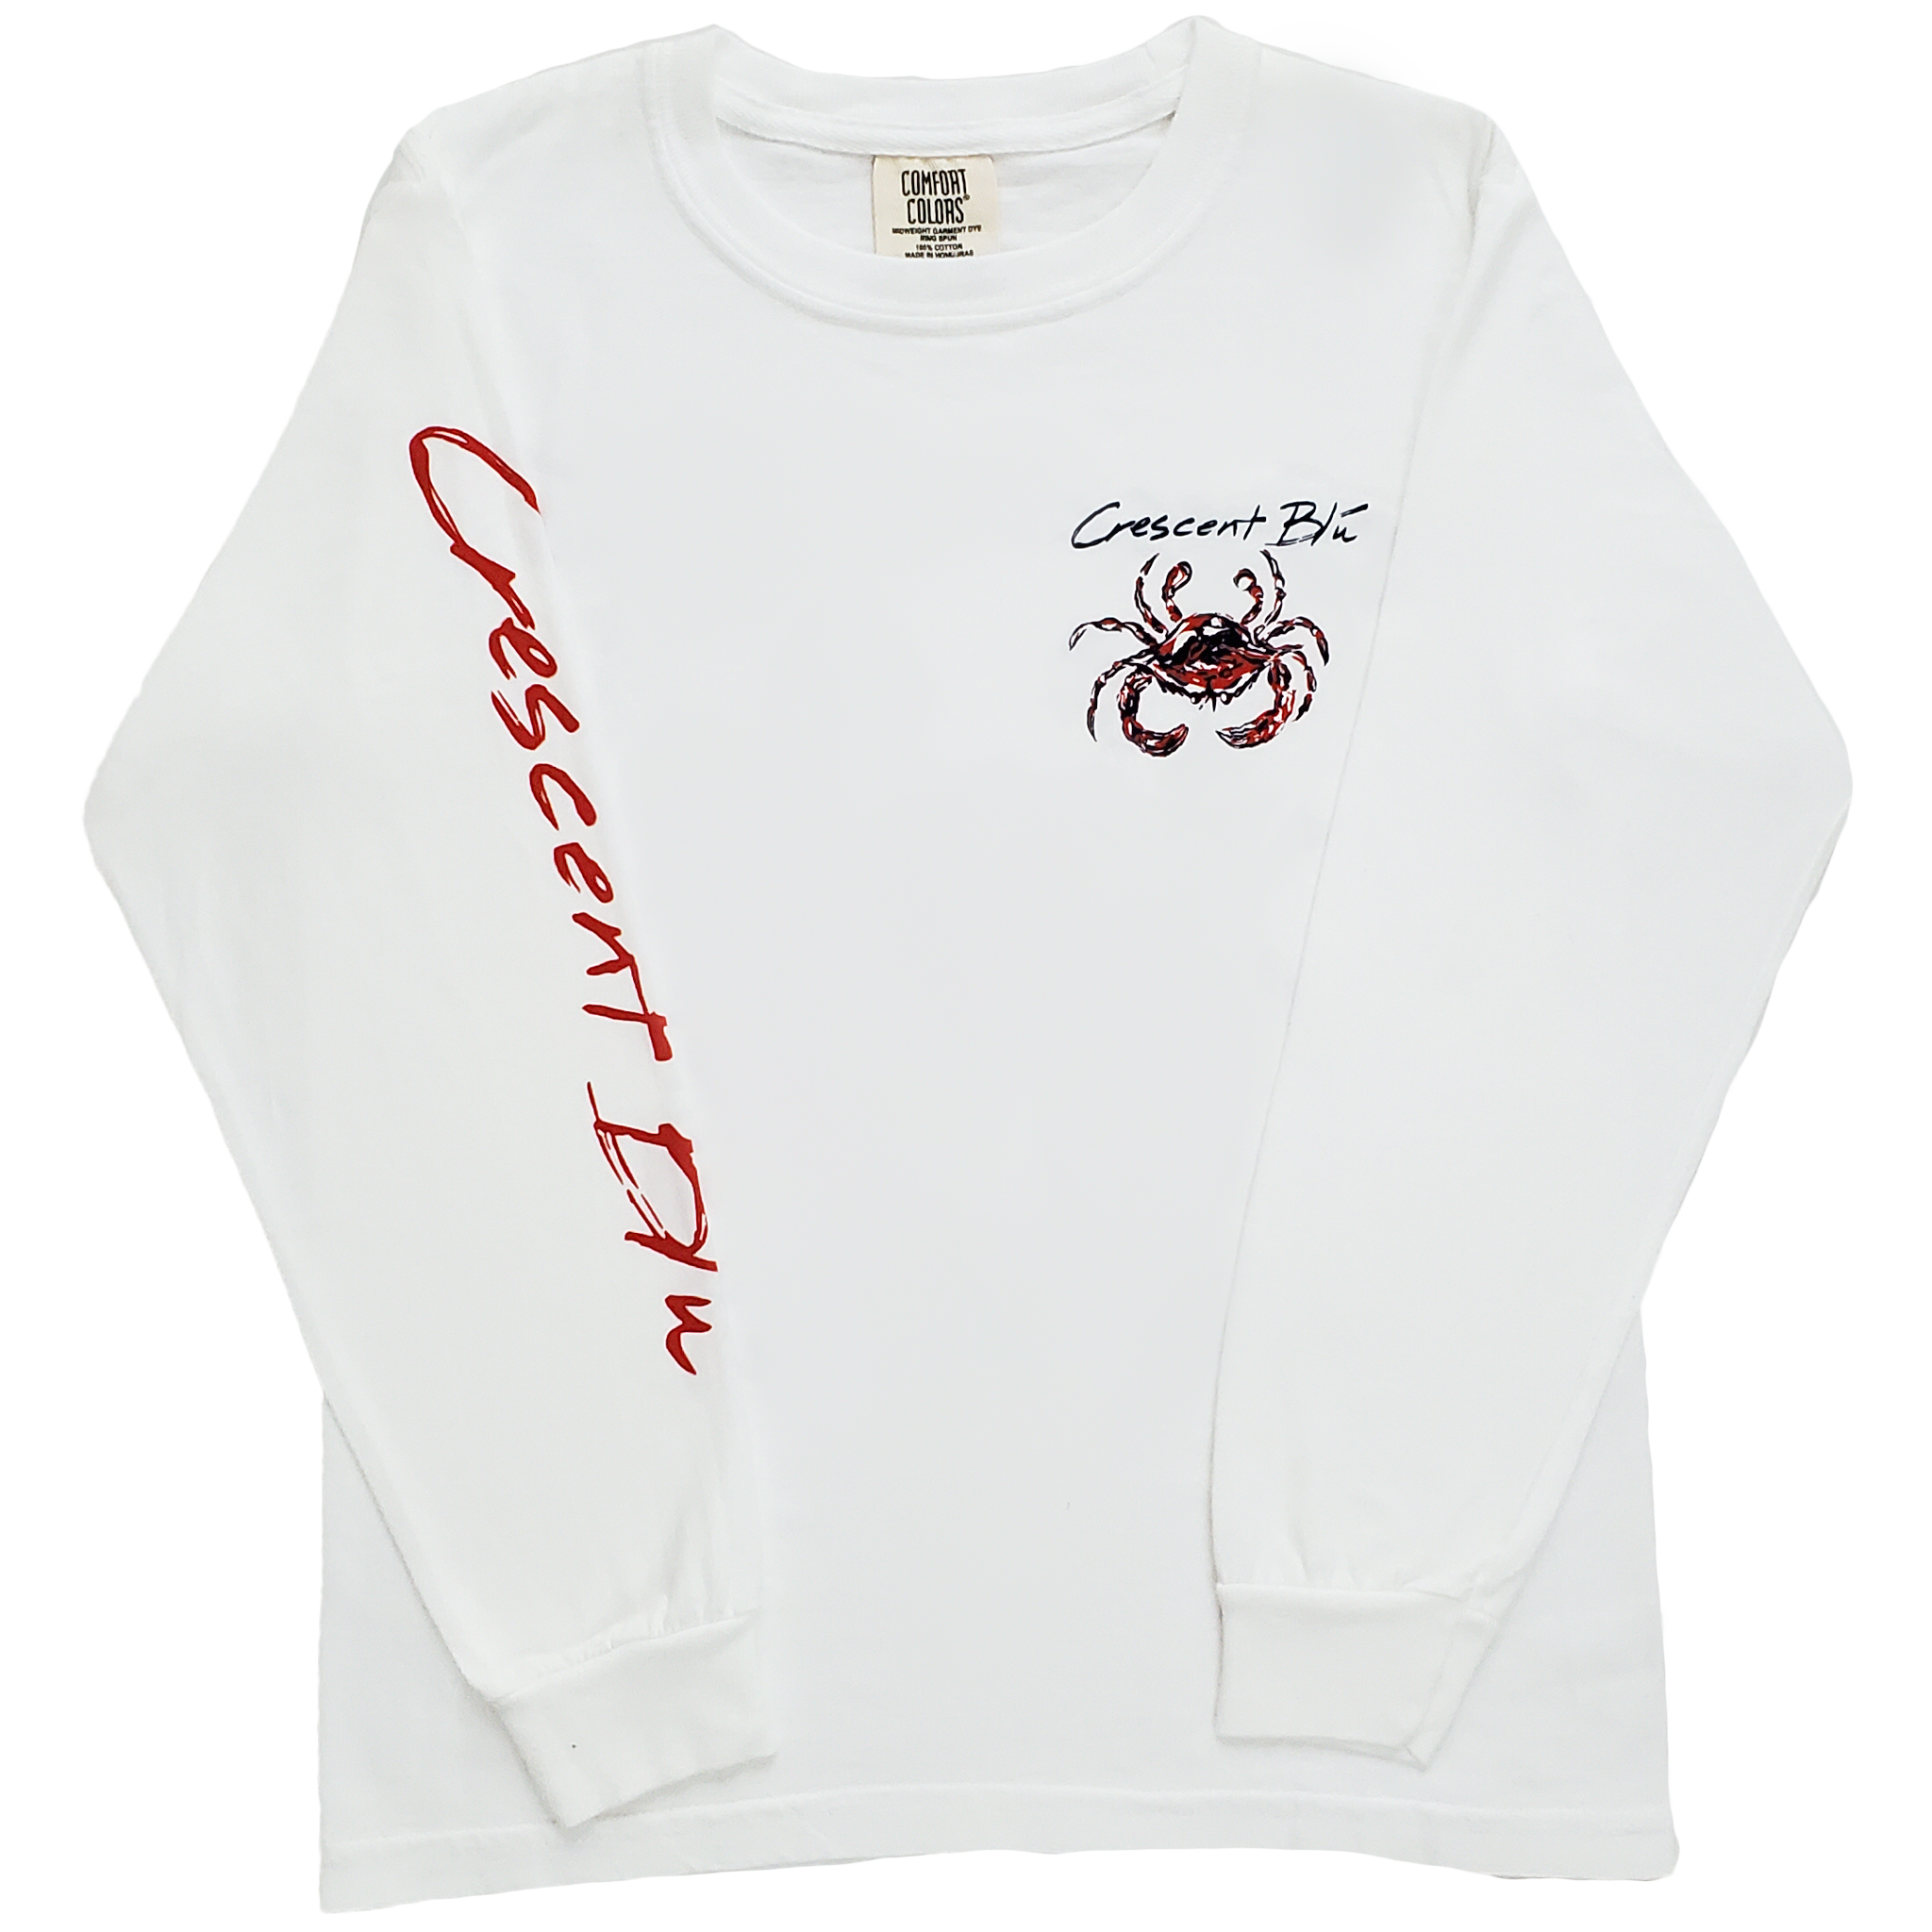 Long sleeve with tee with a red, white, and blue crab on the left chest, and the words Crescent Blú on the right sleeve.